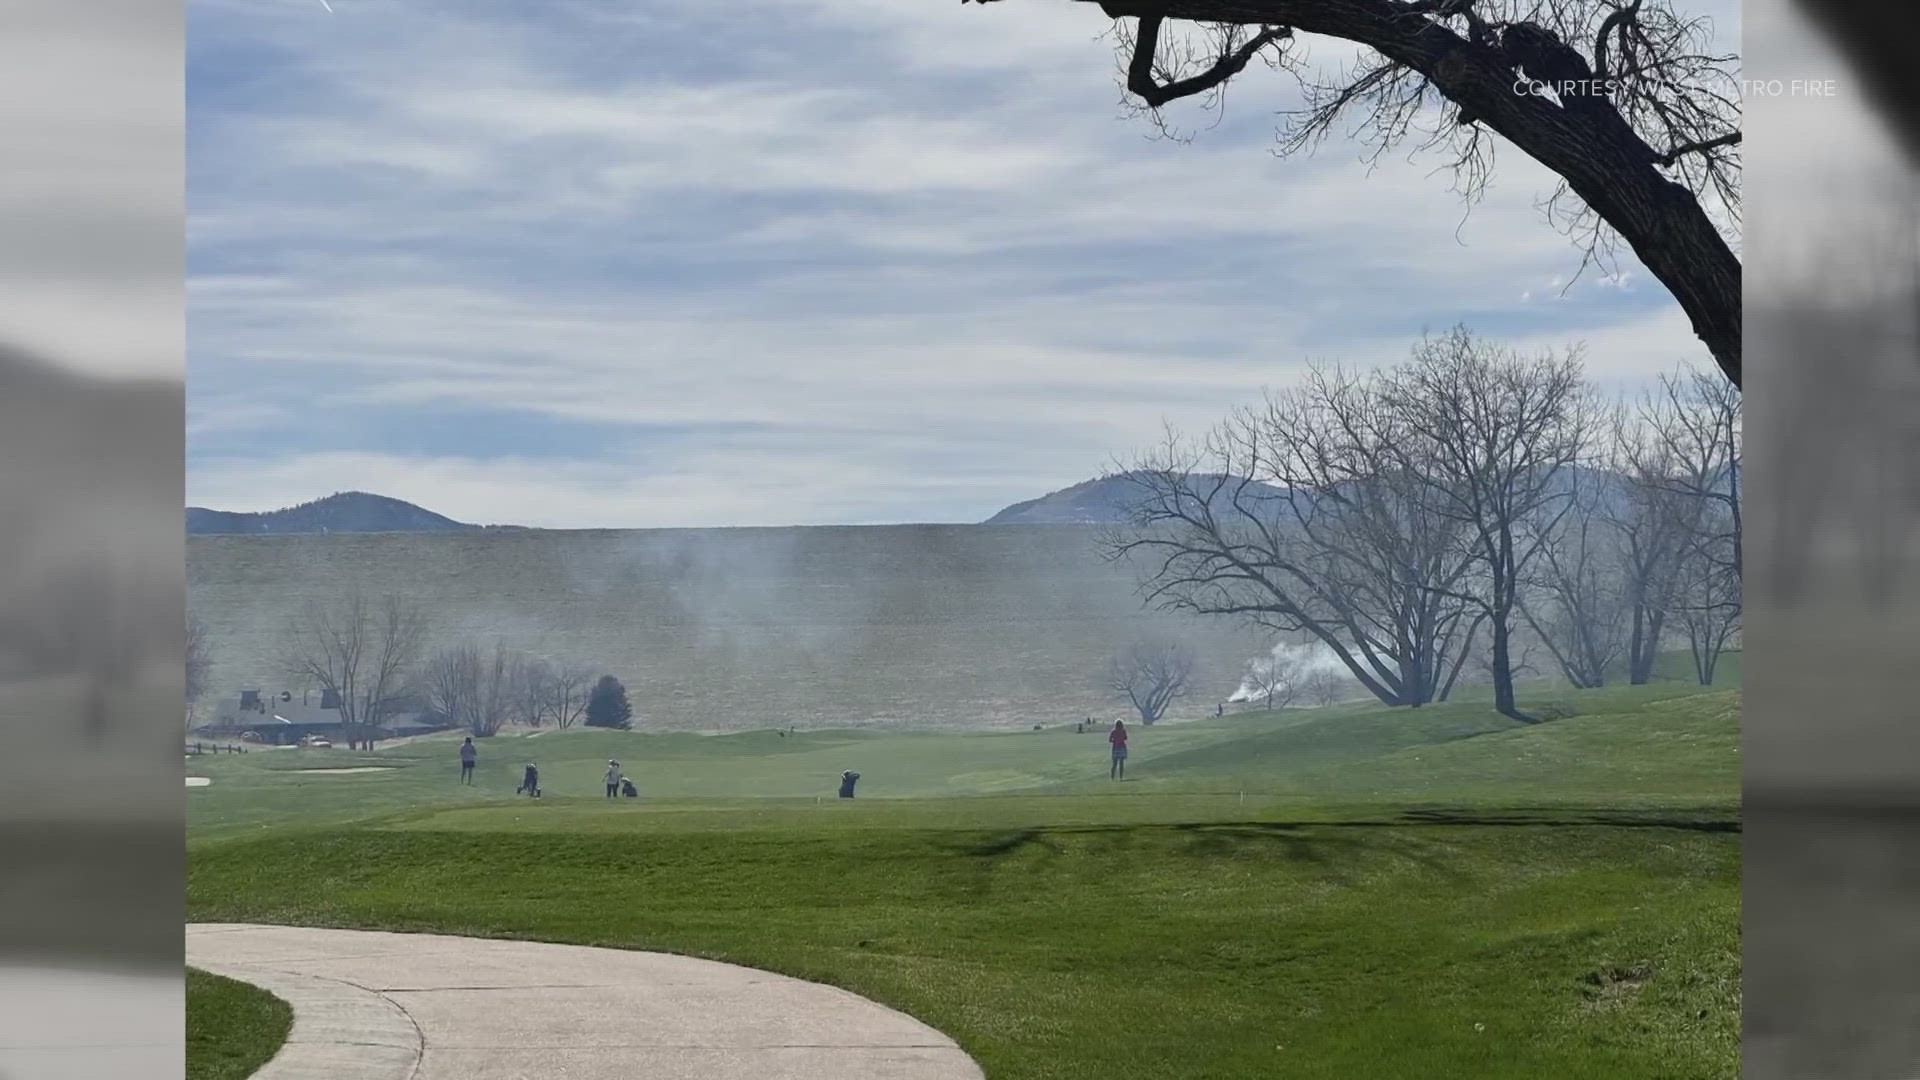 West Metro Fire said Joseph Duran was arrested after seven fires were lit in and around Fox Hollow Golf Course on April 4.